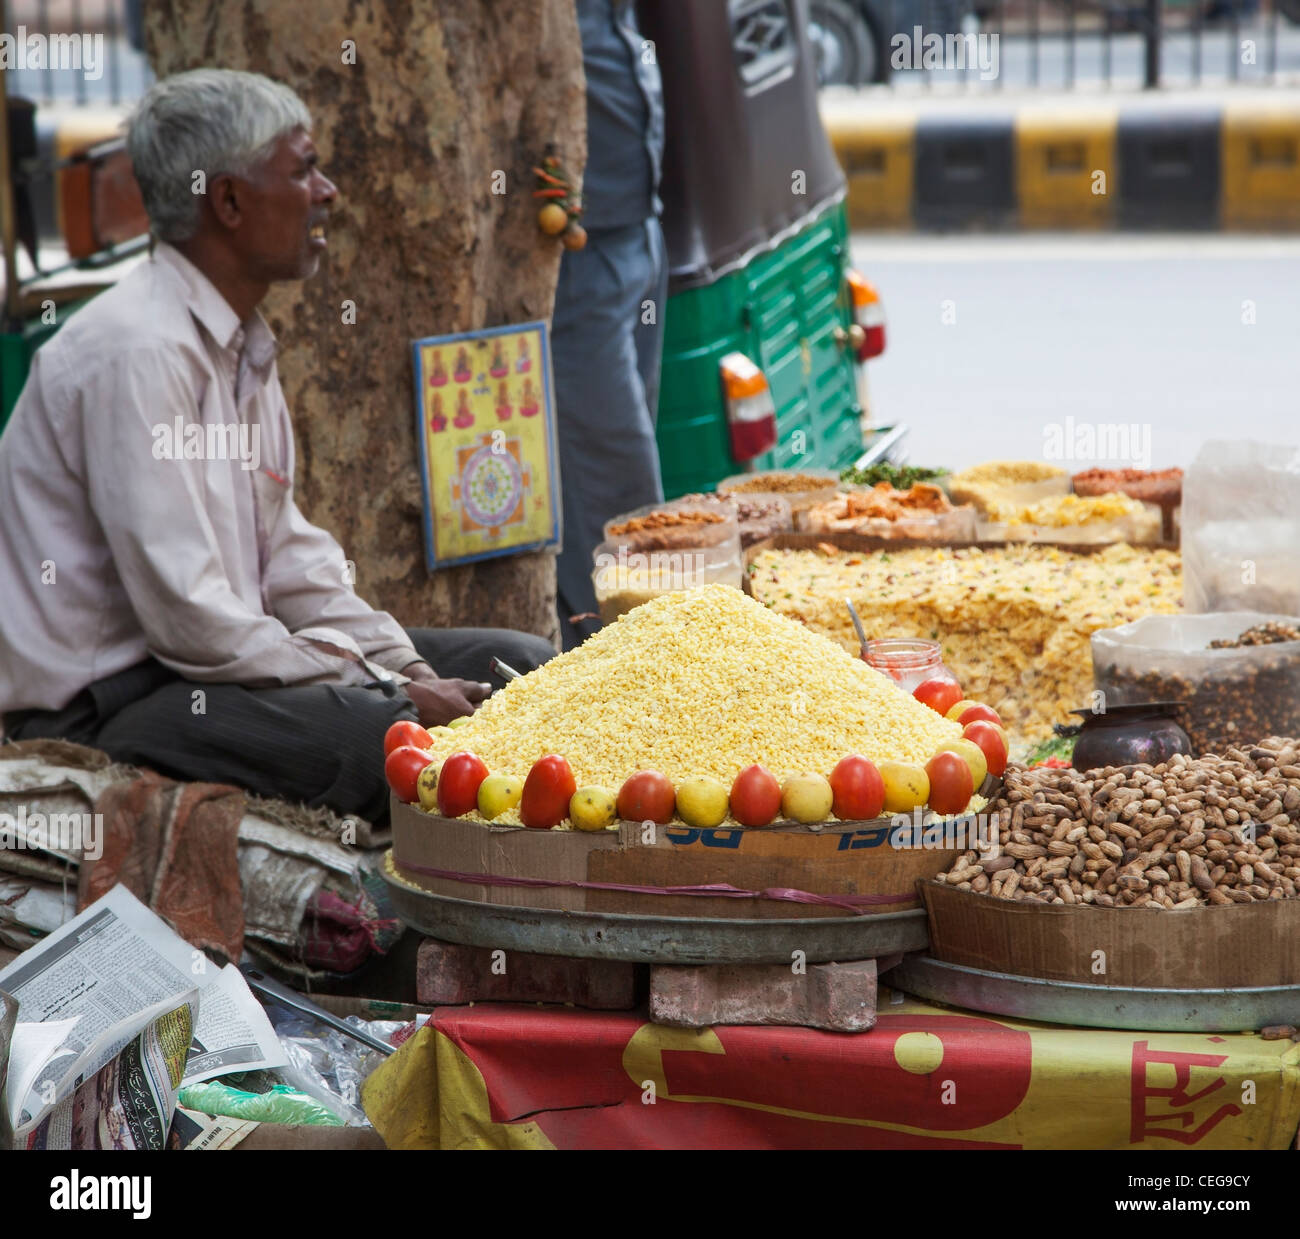 Bored-looking street seller selling rice, peanuts, fruit and other foods in New Delhi, India, arranged in a colorful display Stock Photo